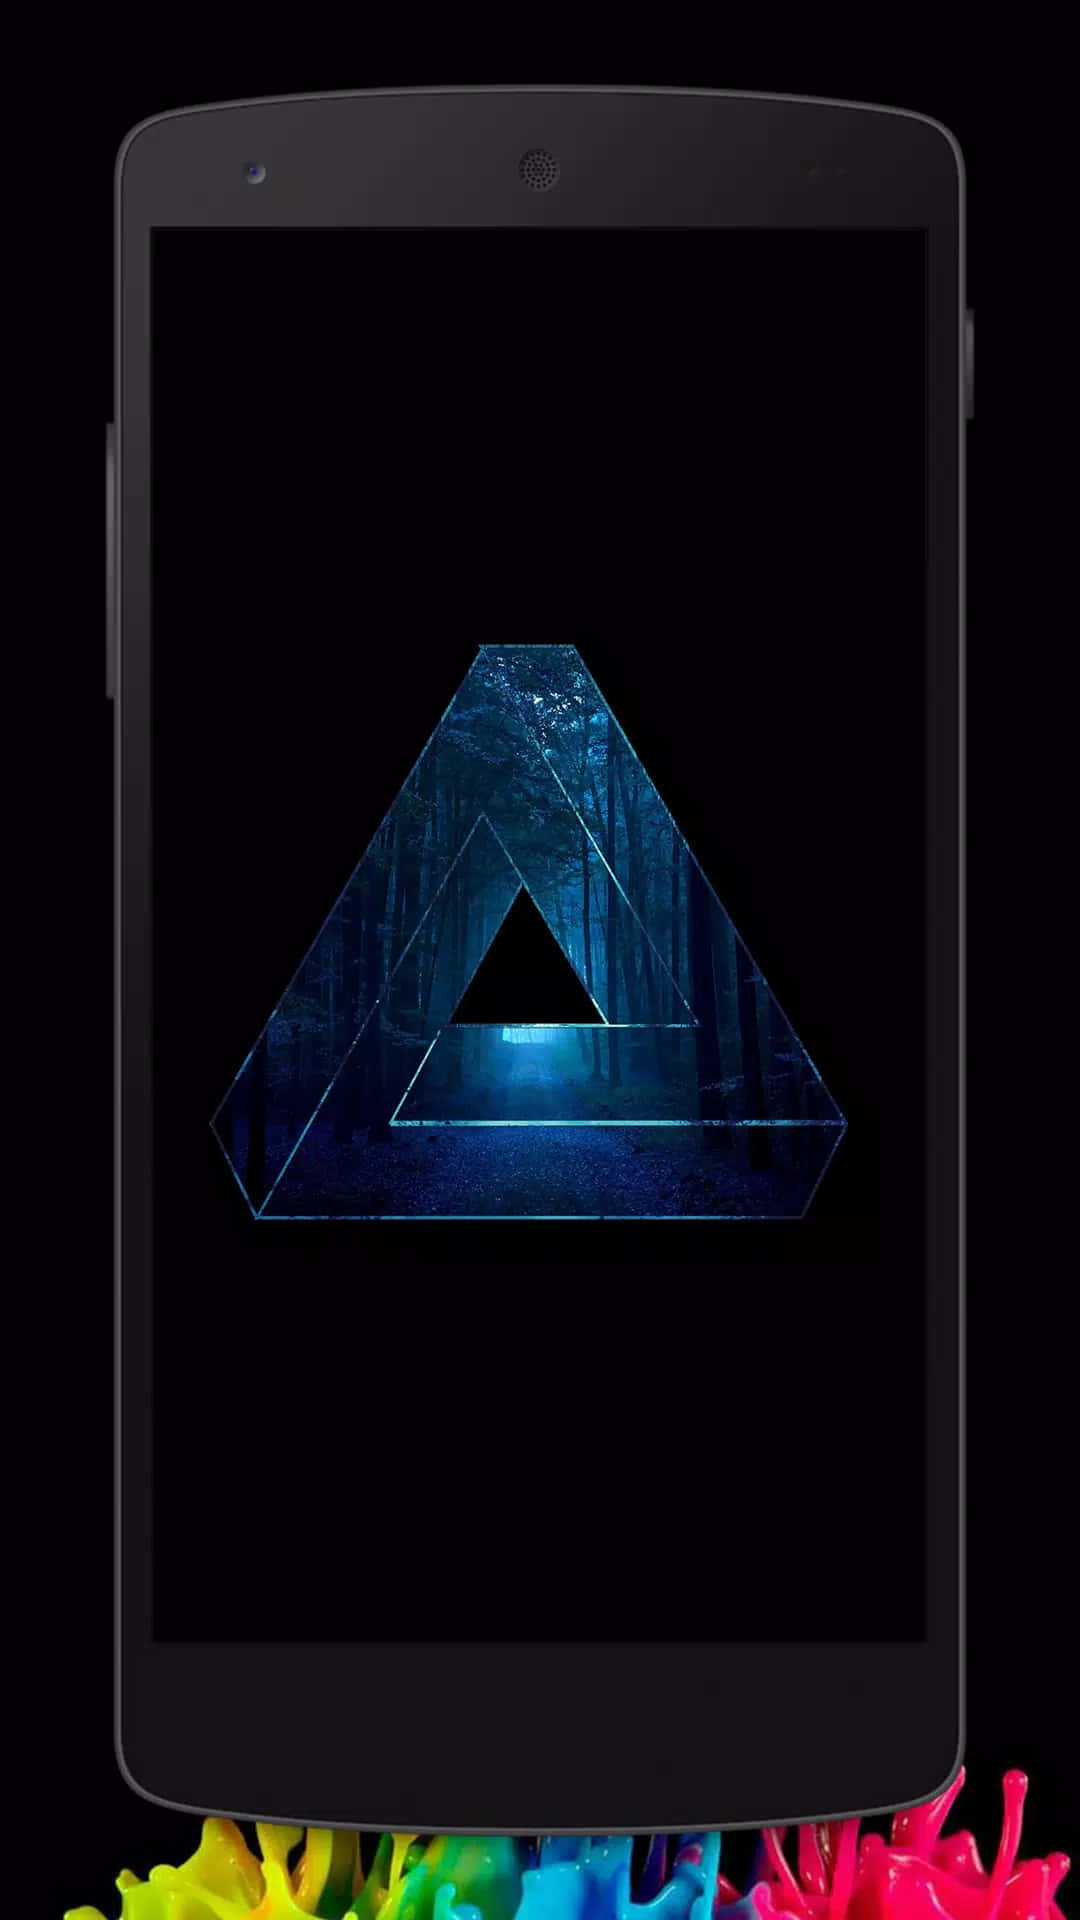 Enjoy watching bright colors displayed with great depth from your amoled device. Wallpaper